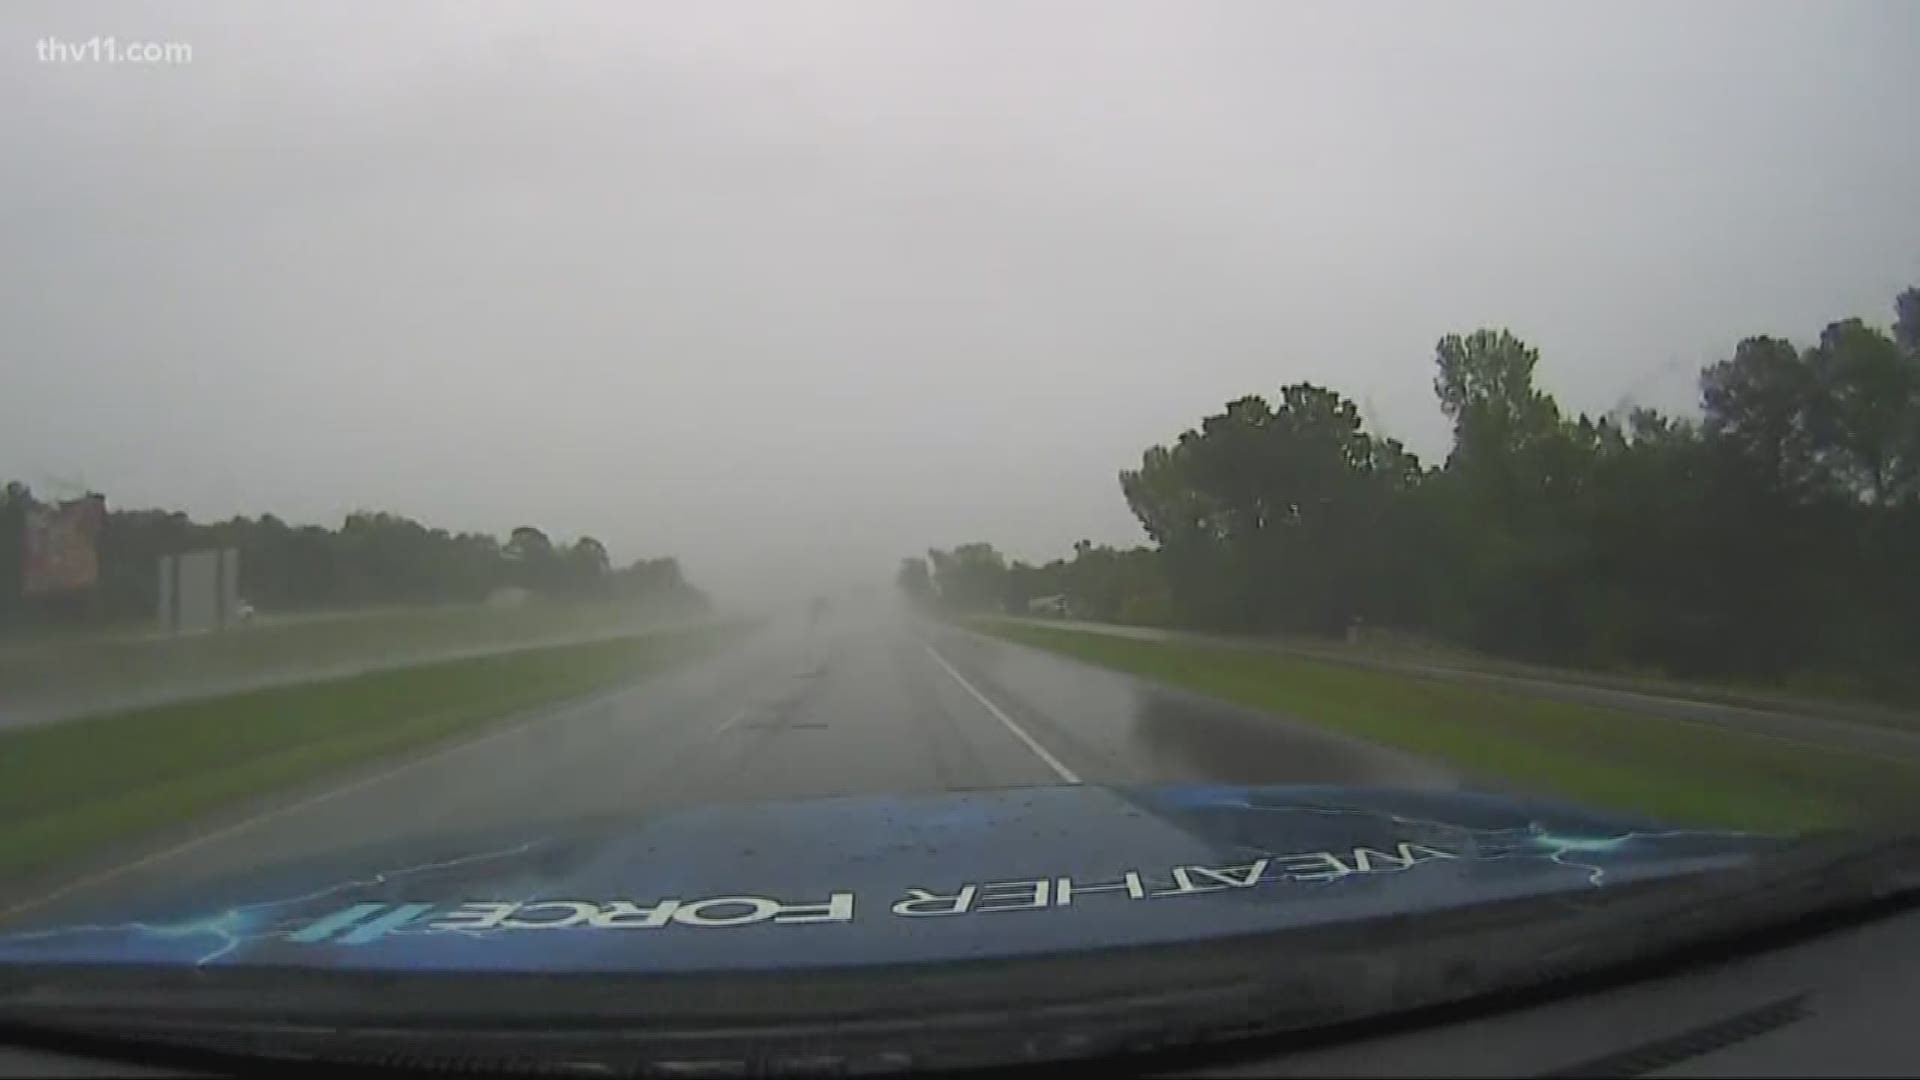 THV11's David Lippman is out in the Weatherforce 11. With this much rain, the roads have been a mess.